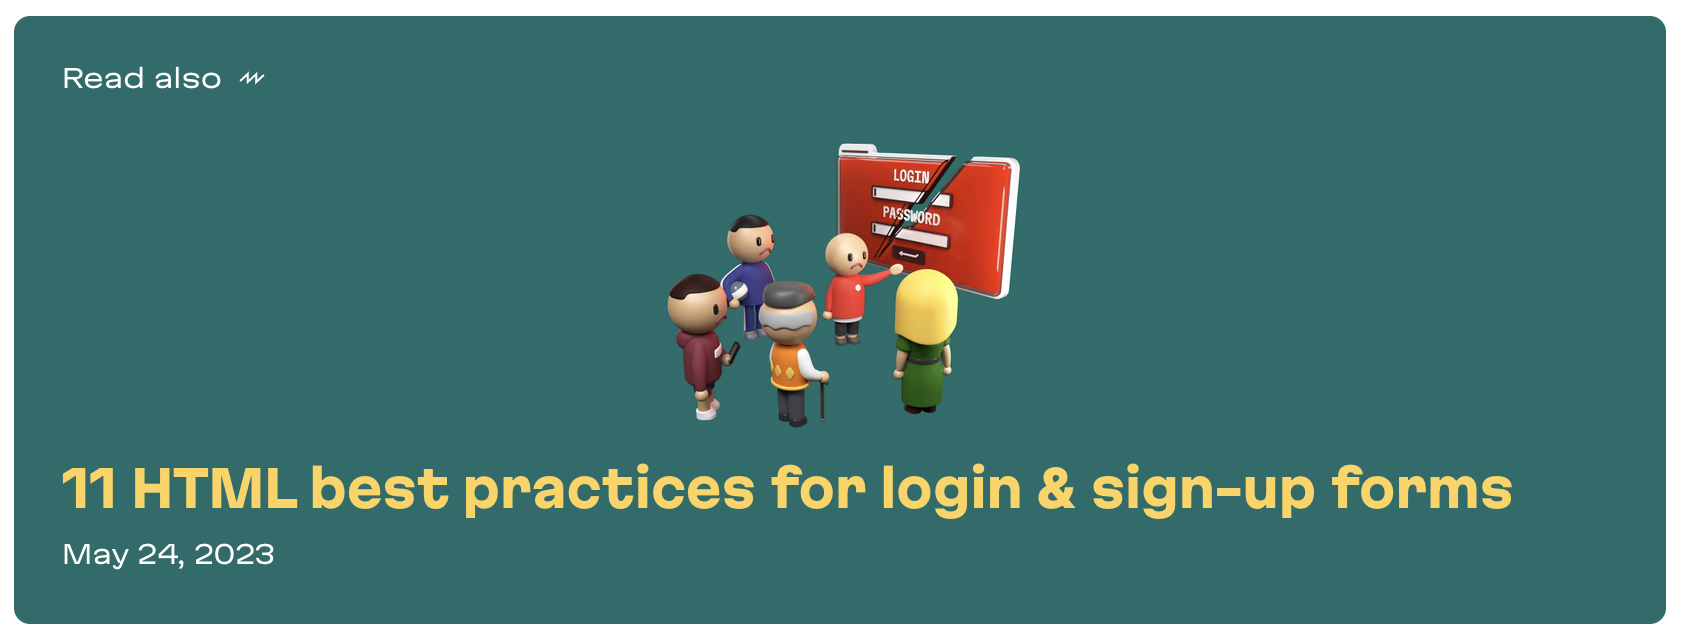 html-best-practices-for-login-and-signup-forms.png